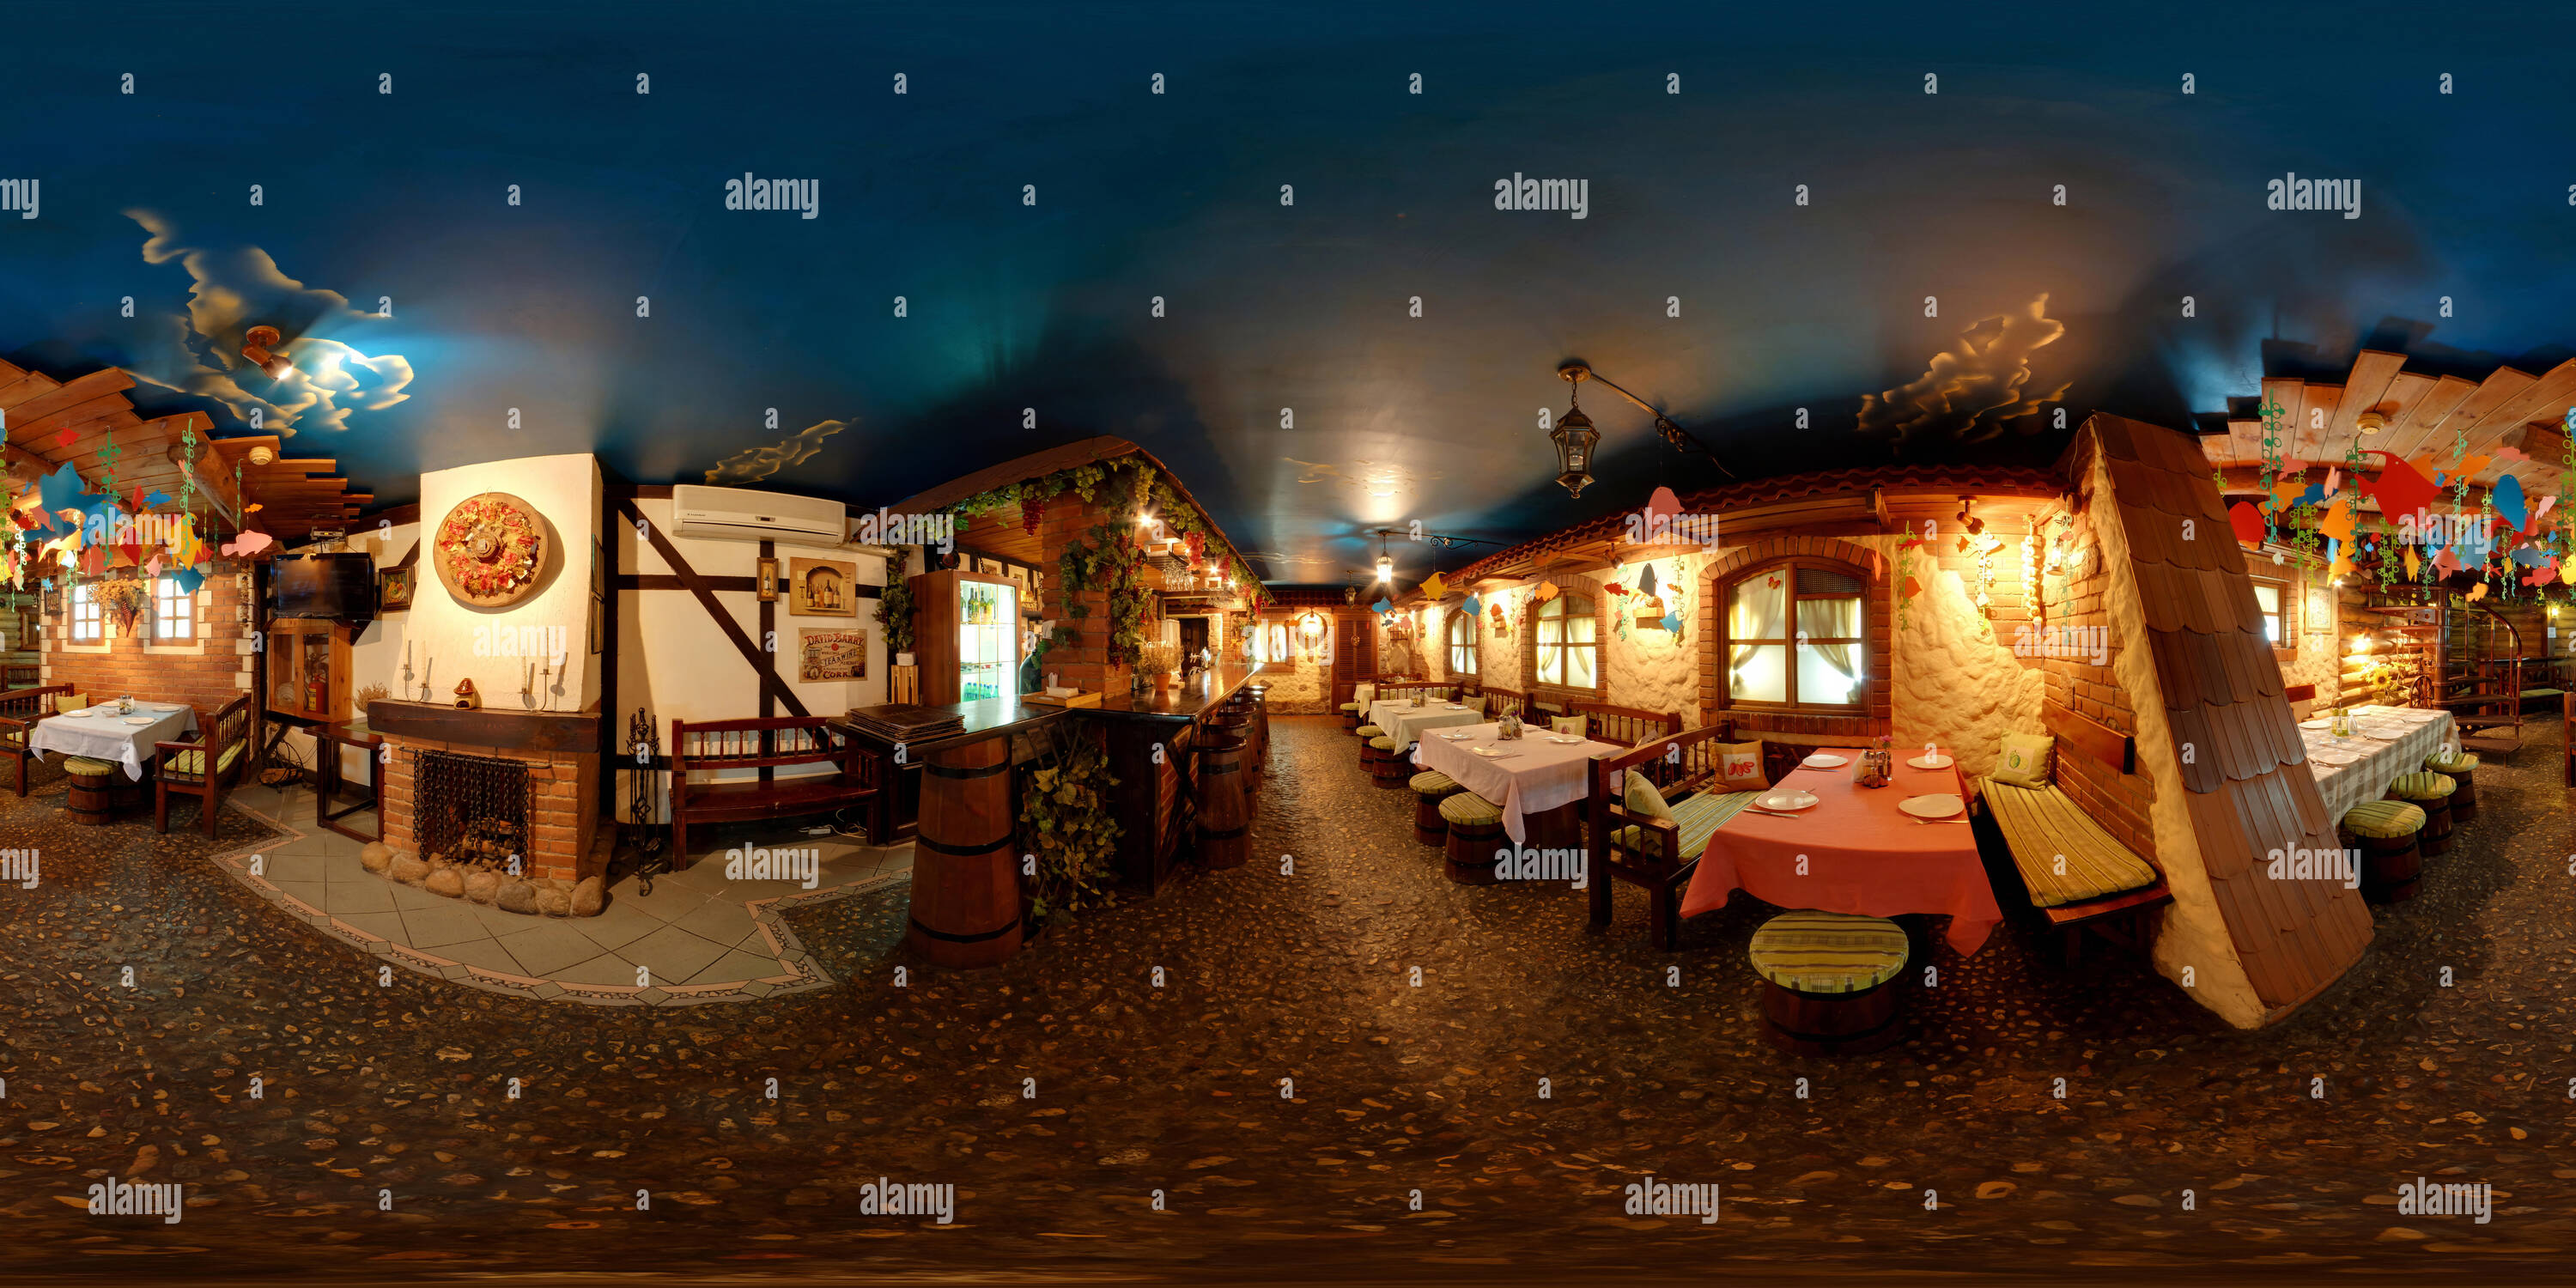 360 degree panoramic view of MINSK, BELARUS - APRIL 20, 2011: Full 360 degree panorama in equirectangular spherical projection of cafe in vintage folk style.